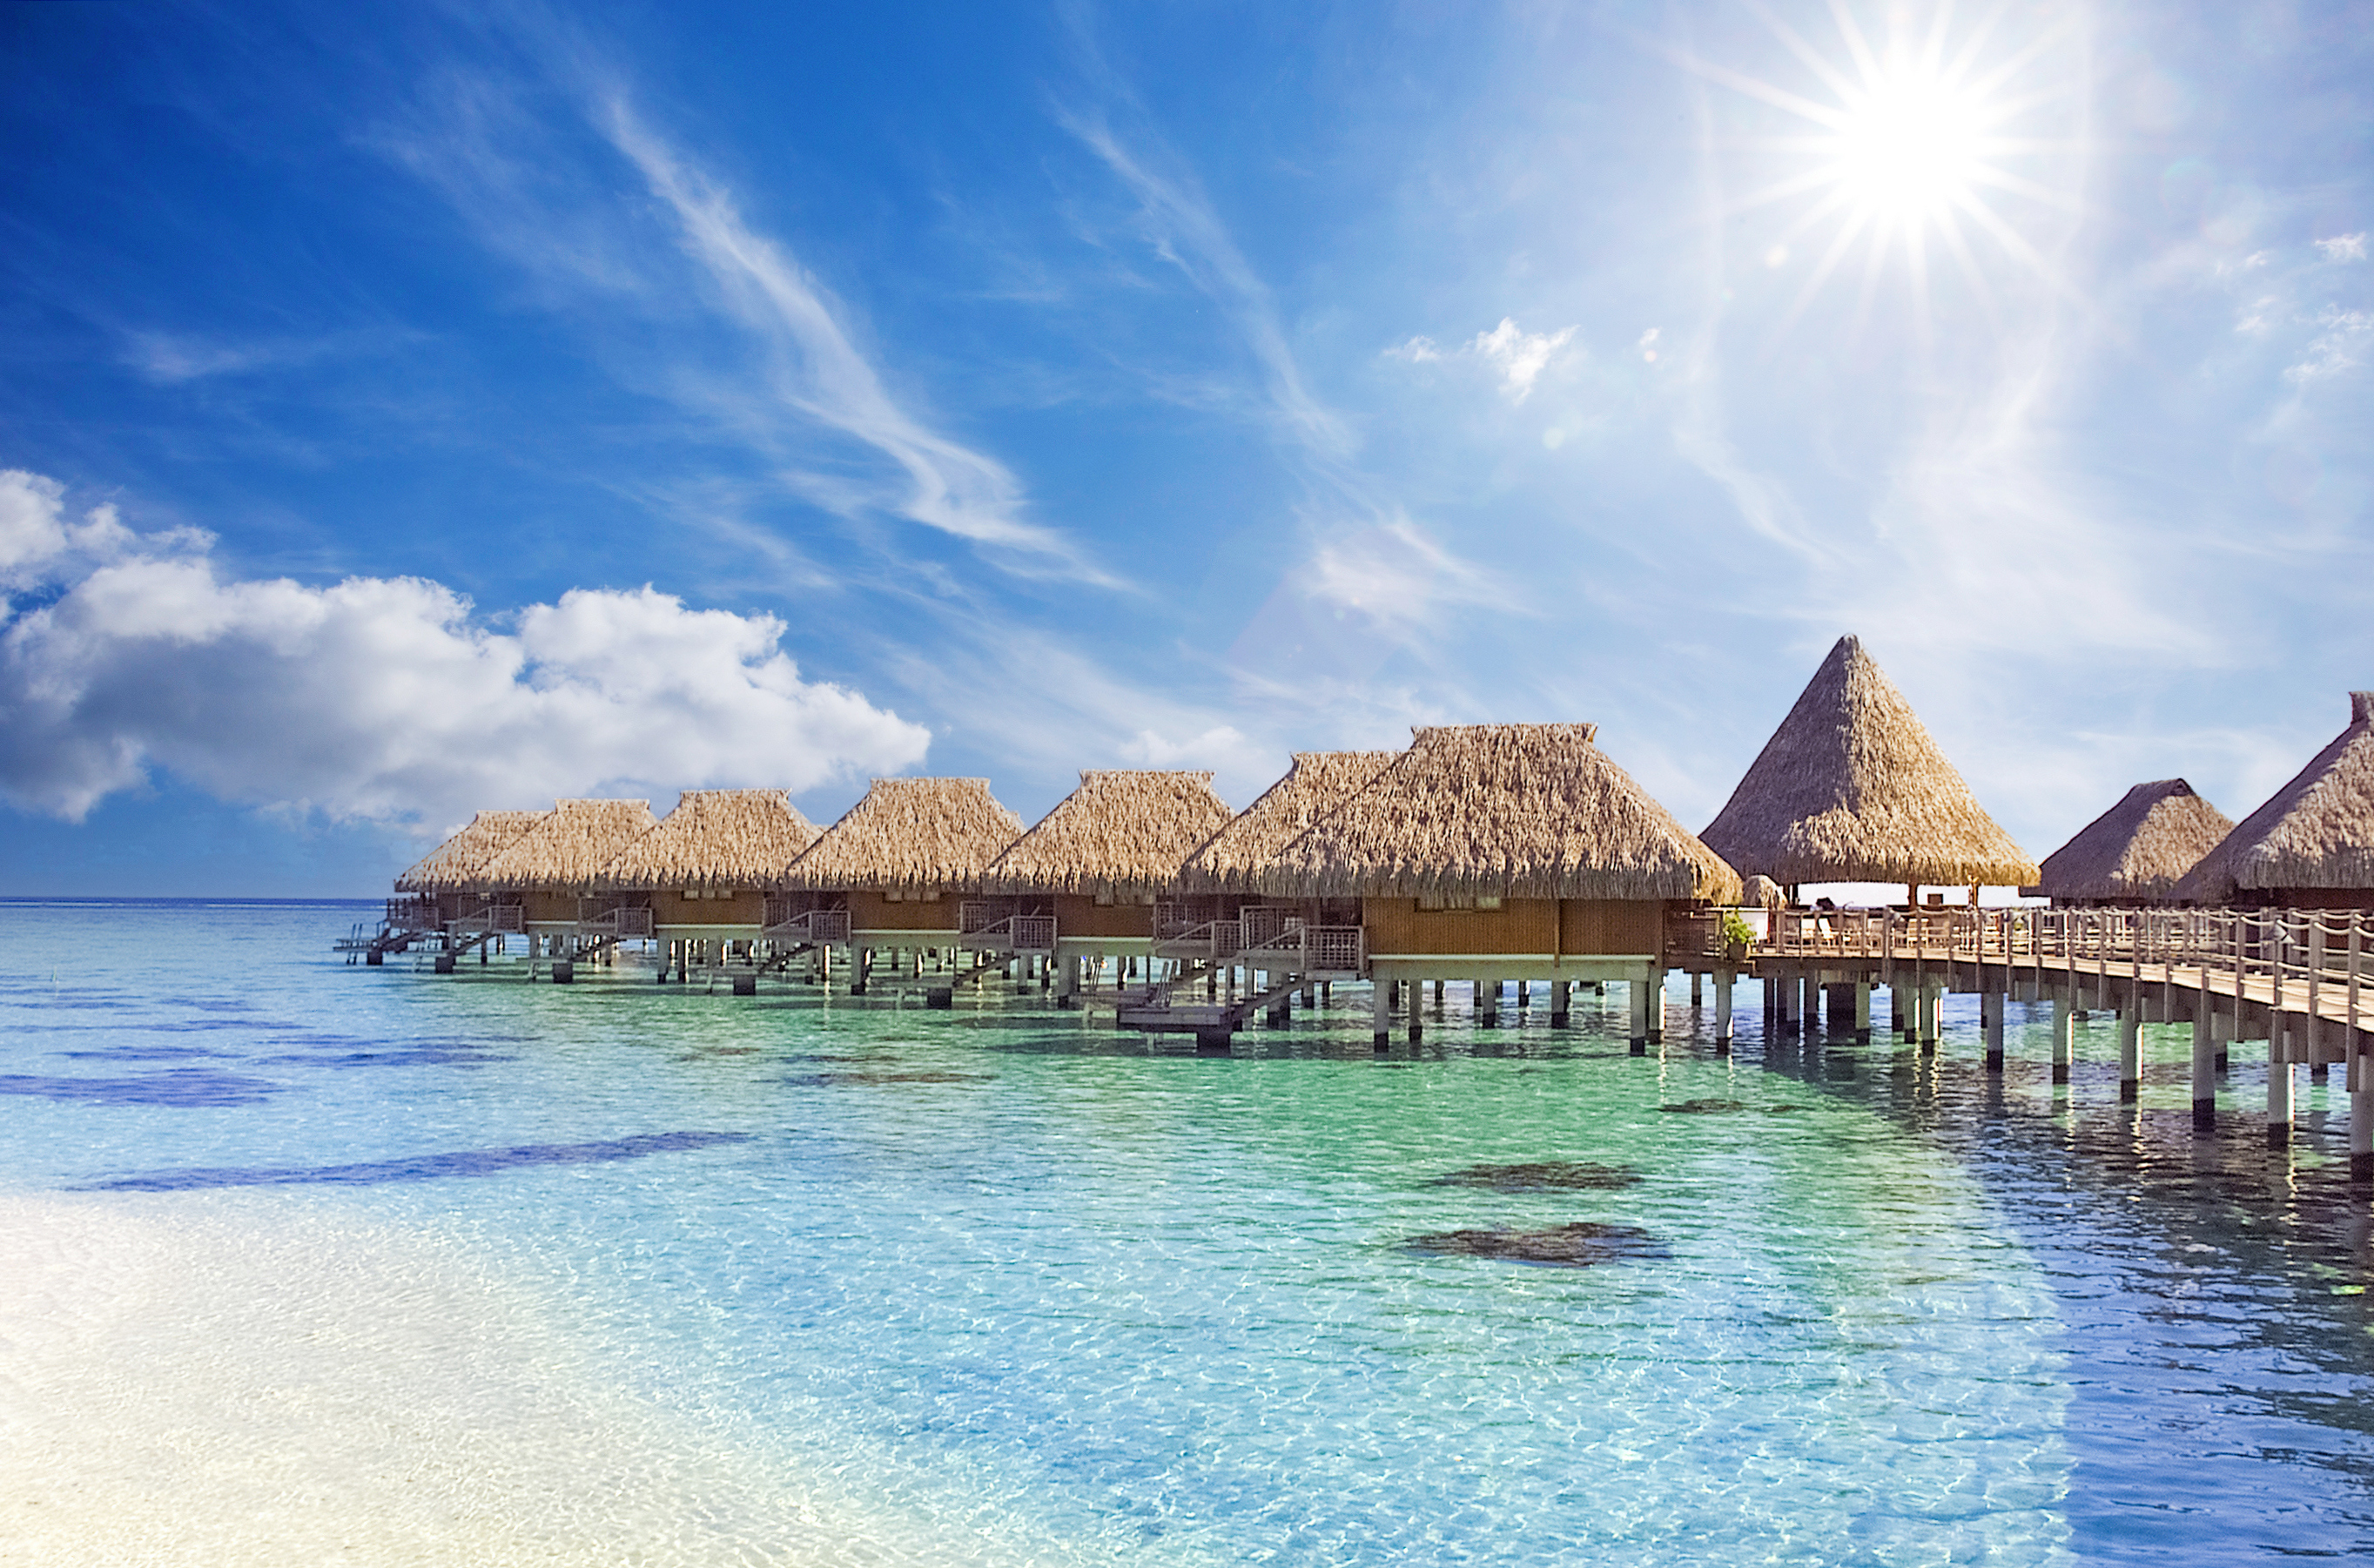 Overwater bungalows extend from a wooden pier into a calm sea under a sunny sky